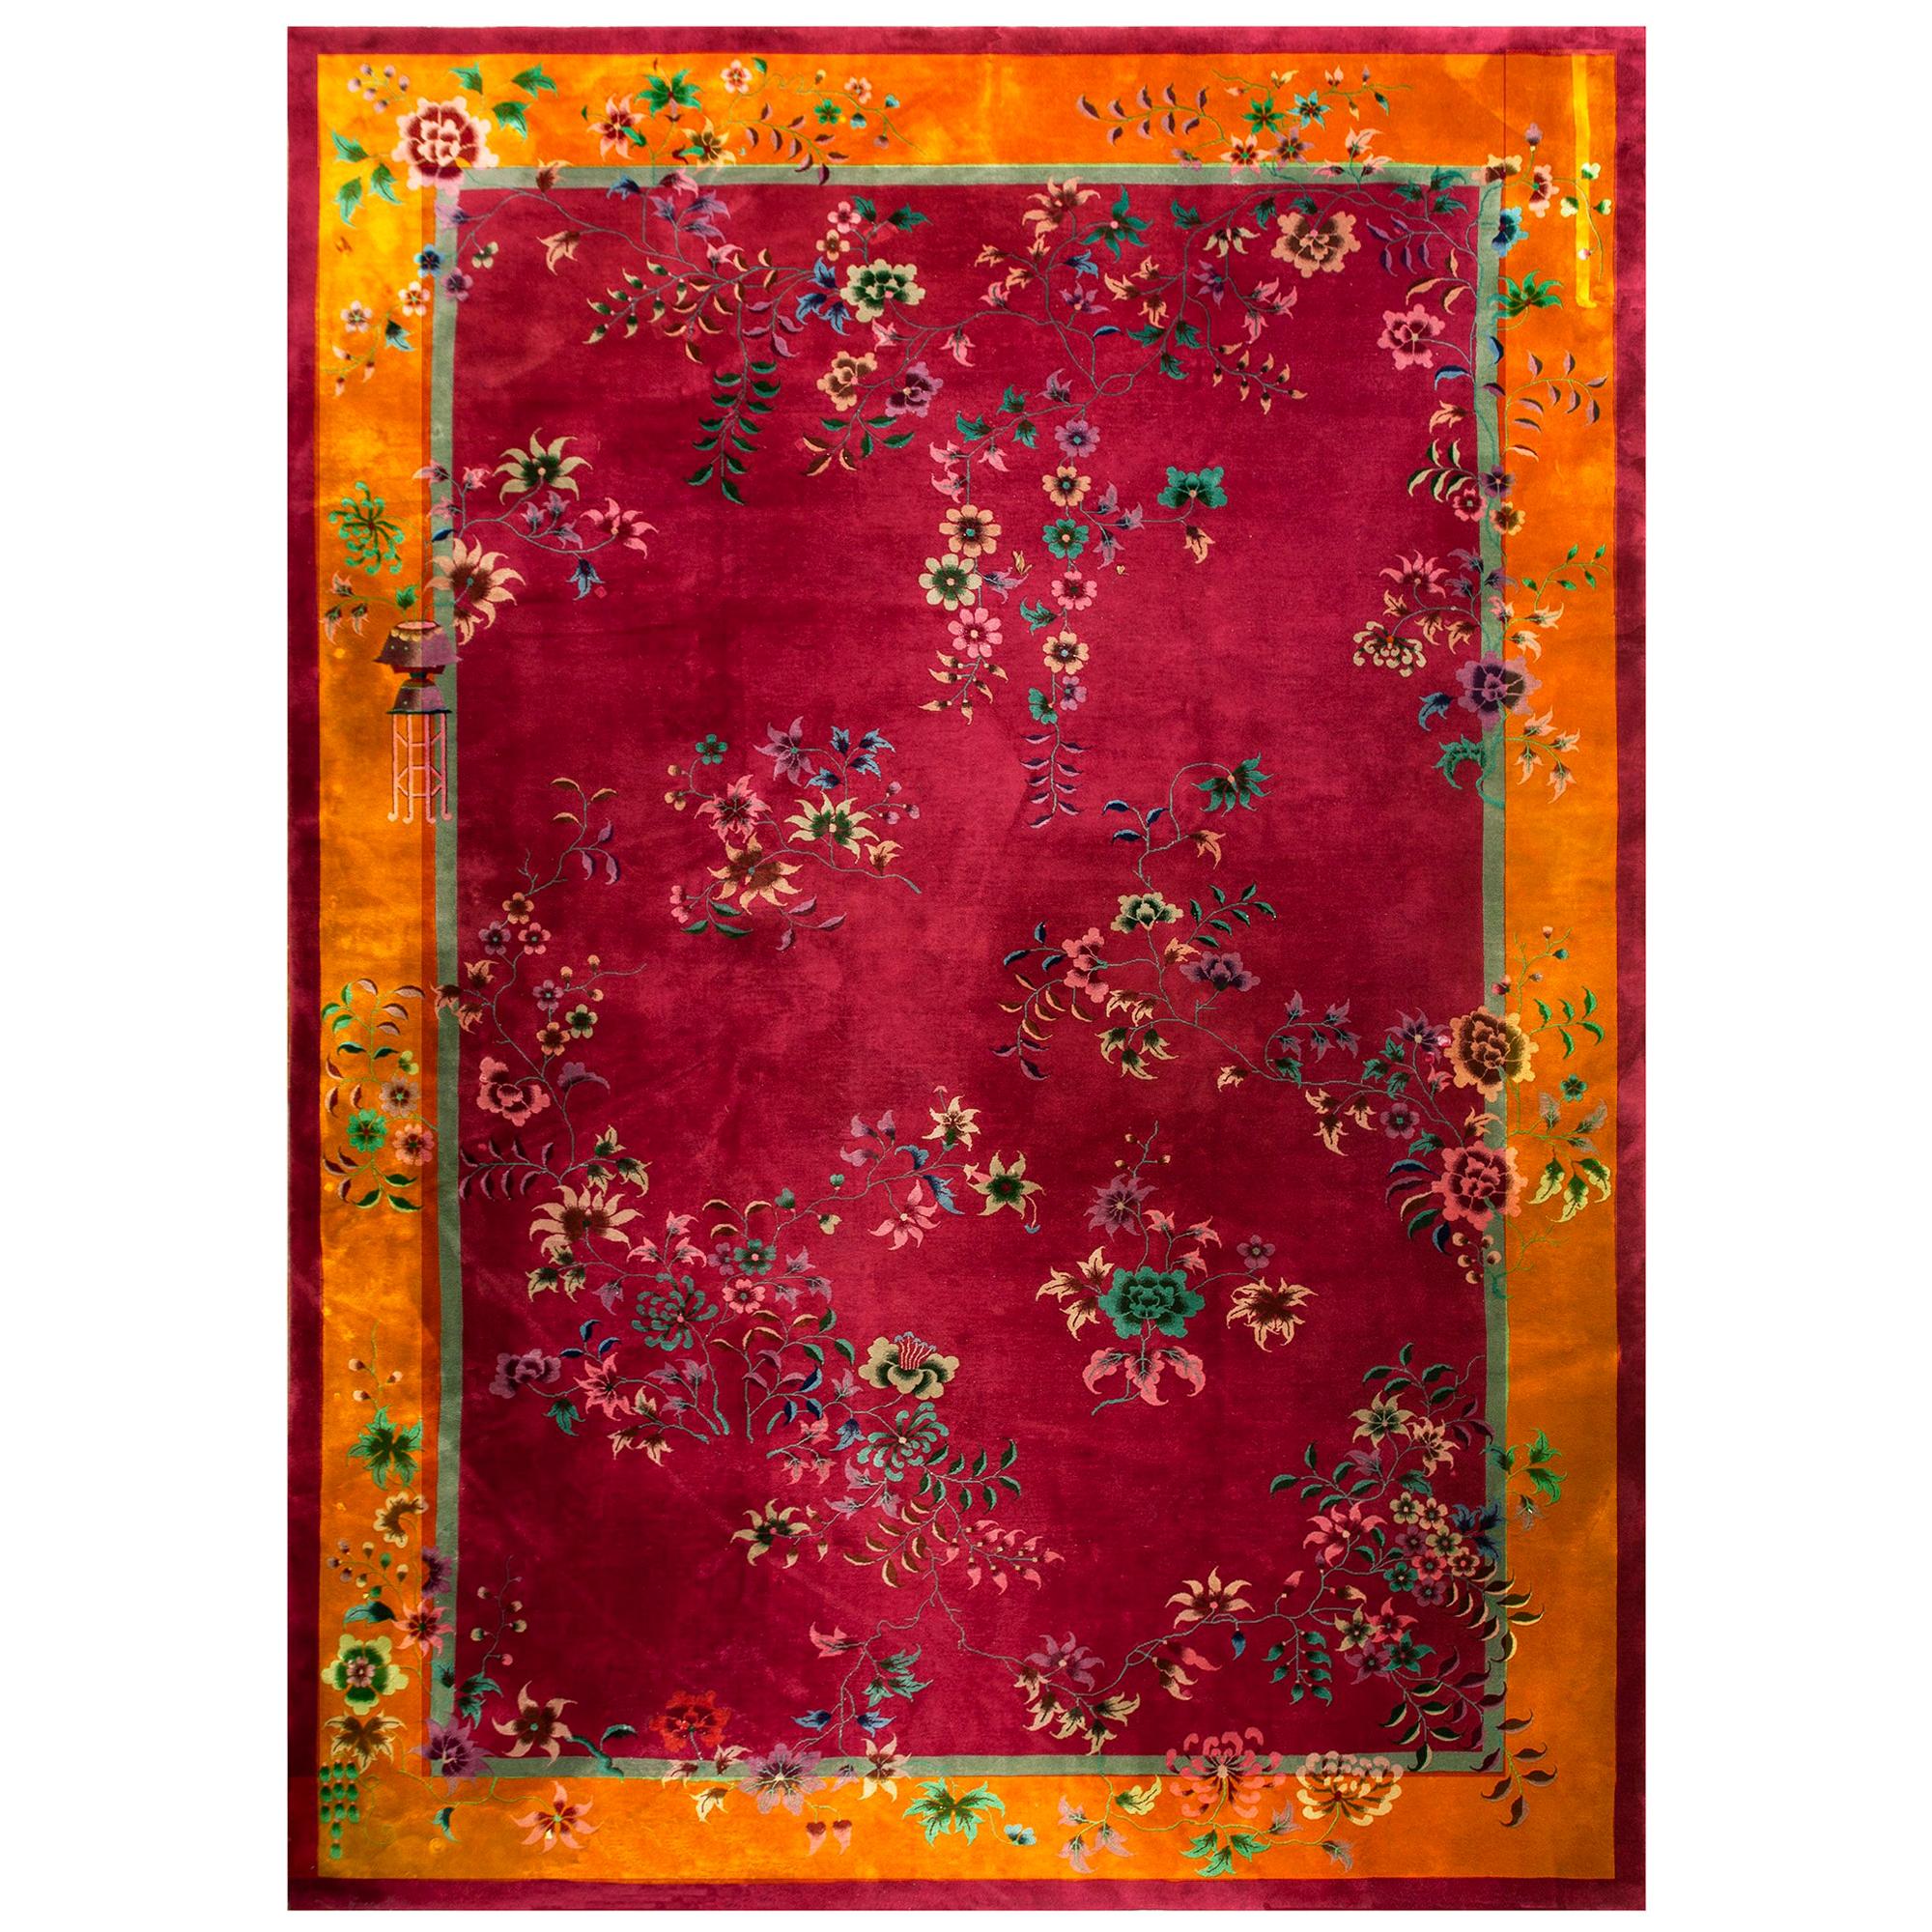 1920s Chinese Art Deco Carpet ( 11'8" x 17'2" - 355 x 523 )  For Sale